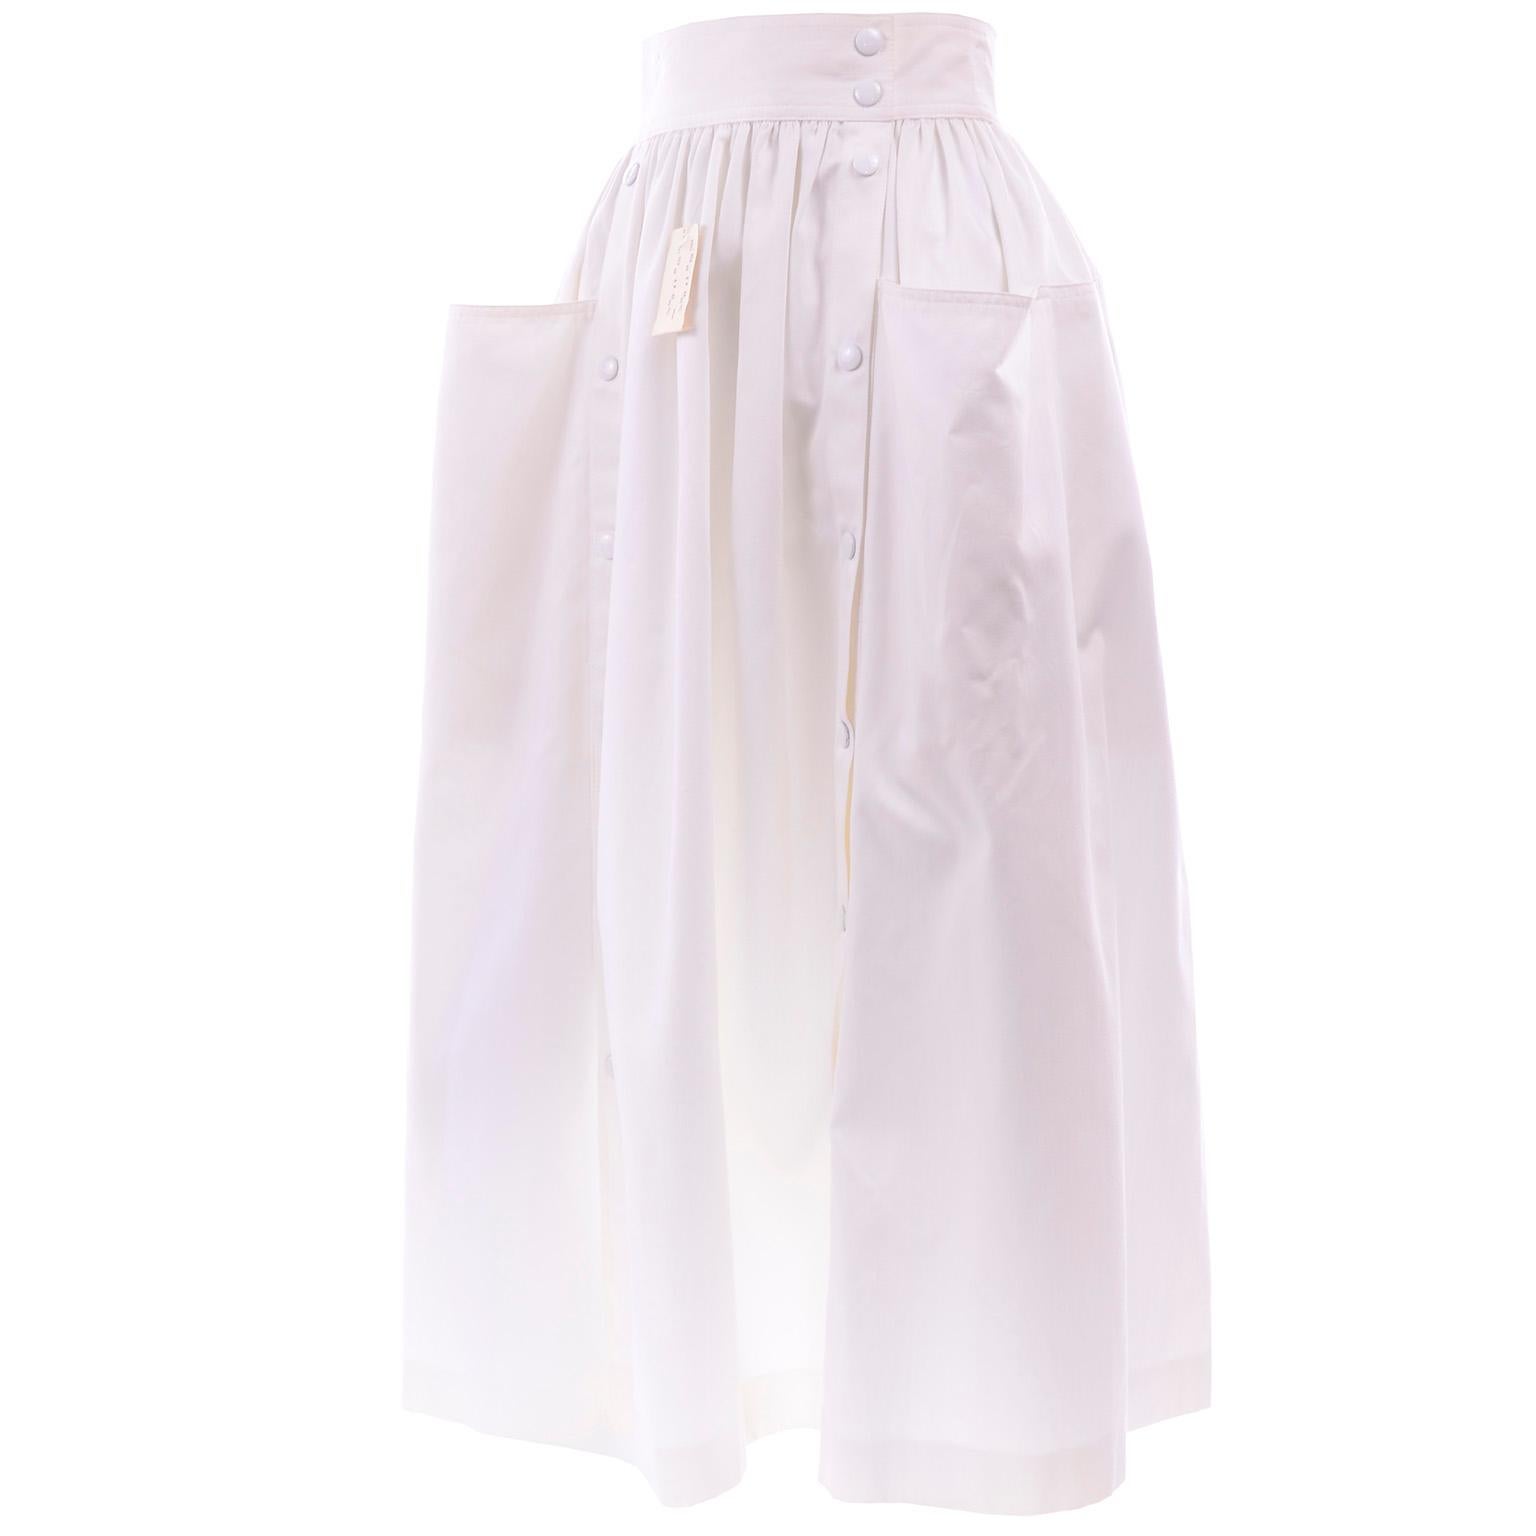 This is an unworn vintage Escada white cotton skirt with front snaps and pockets.  The skirt still has its original tags and is marked a European size 34.  We estimate it to fit a modern day US size 4.  

WAIST: 24